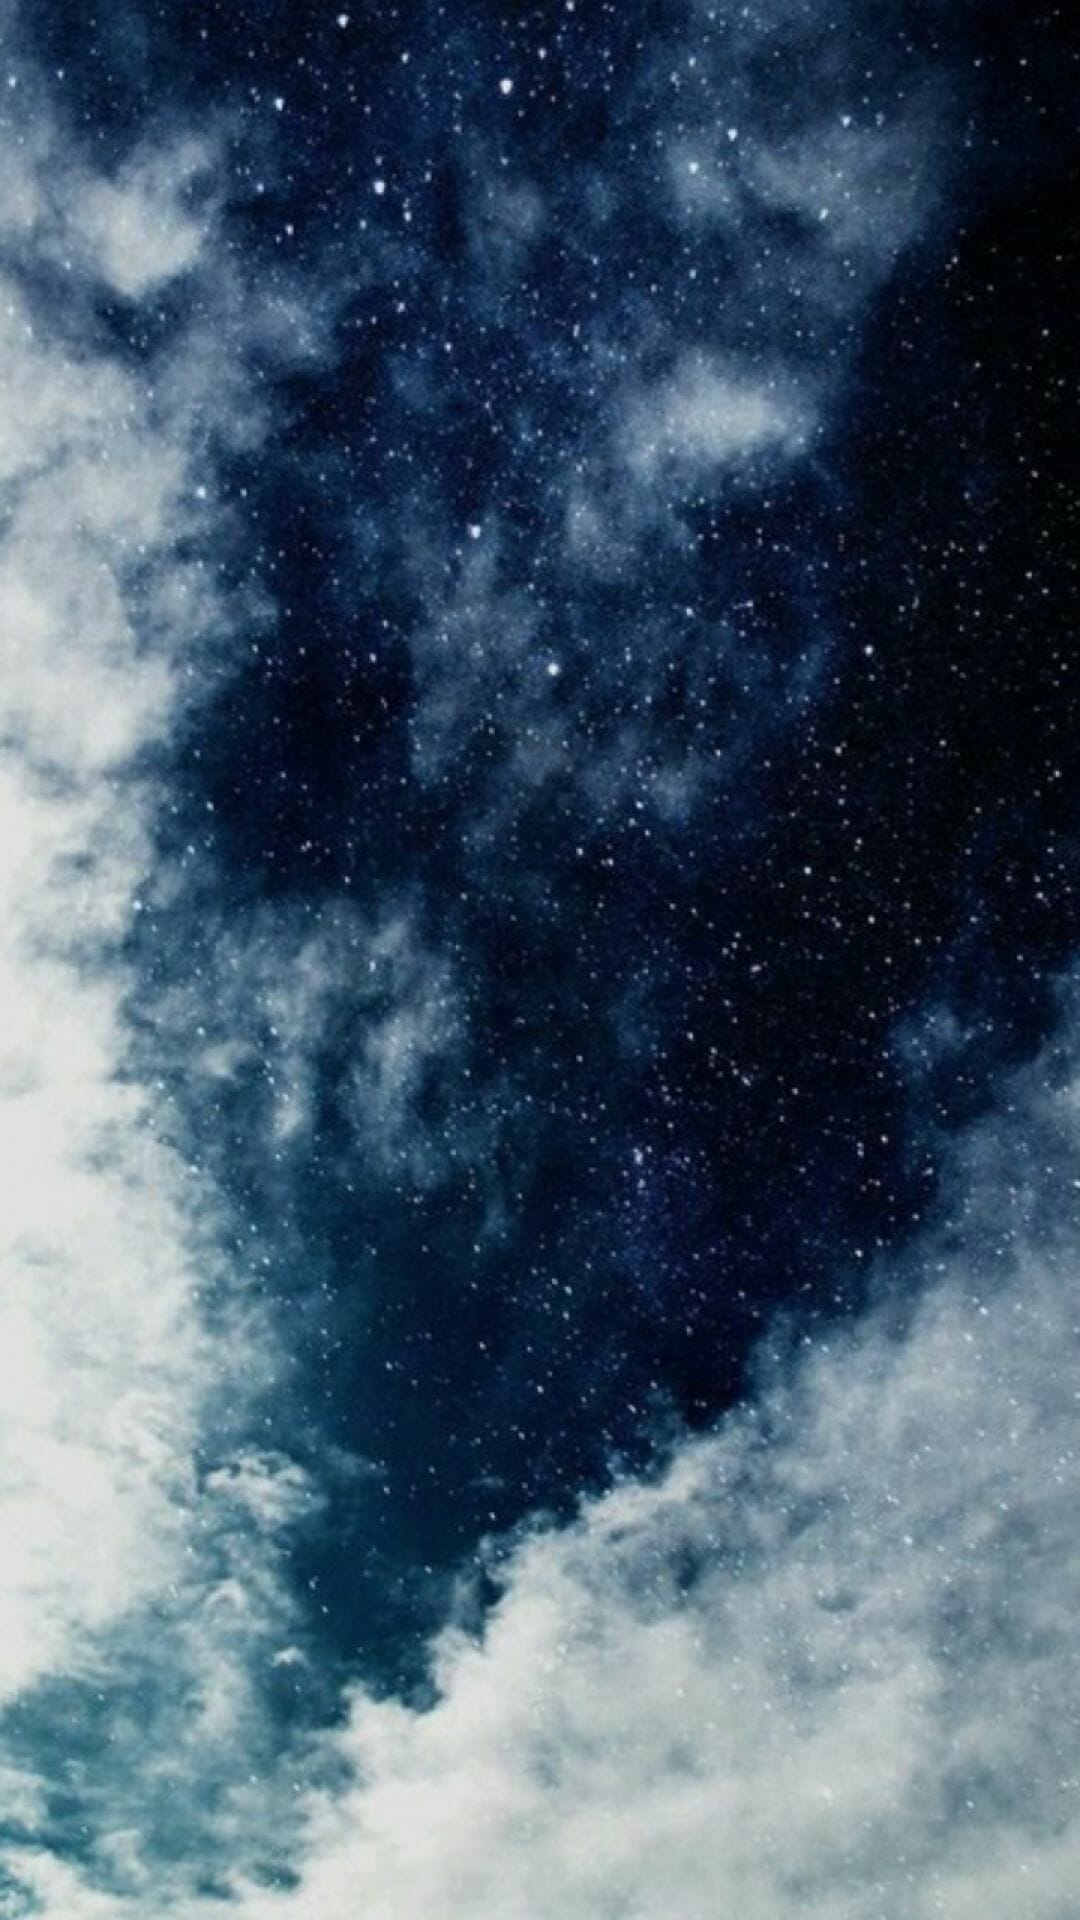 IPhone wallpaper with dark blue sky, white clouds and stars. - Navy blue